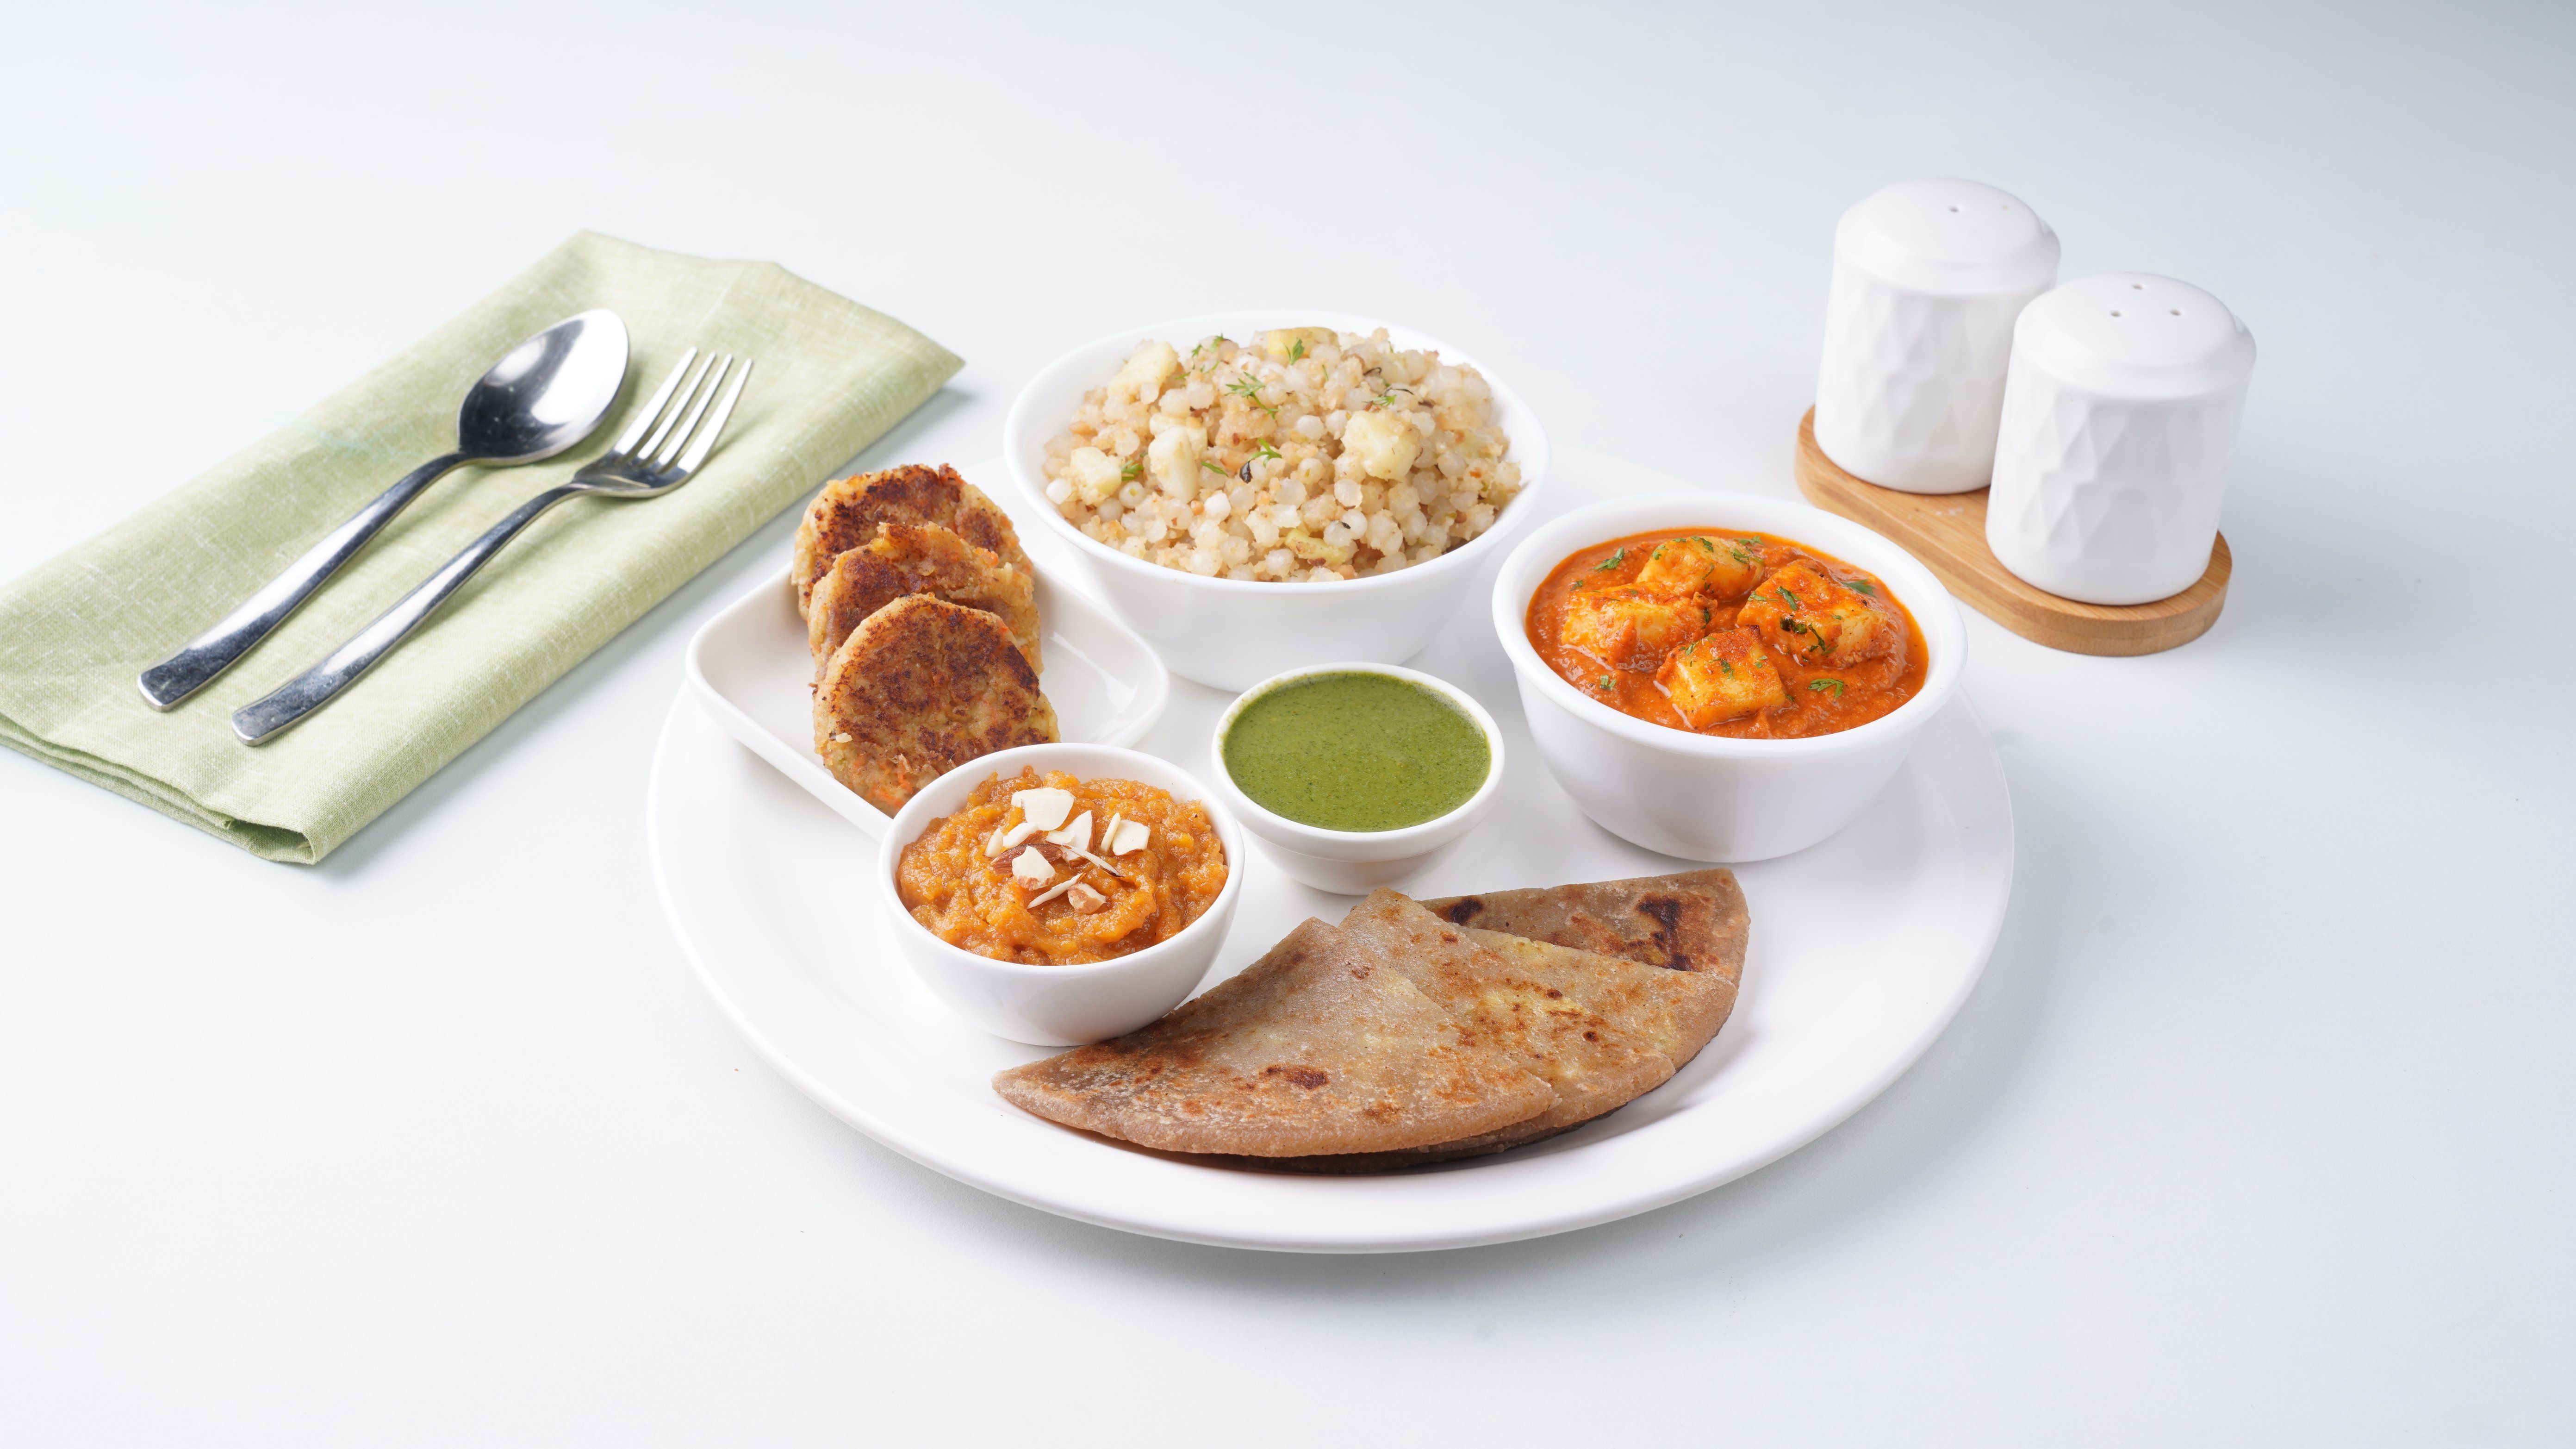 Pure Veg Meals by Lunchbox in New CGR, Ahmedabad